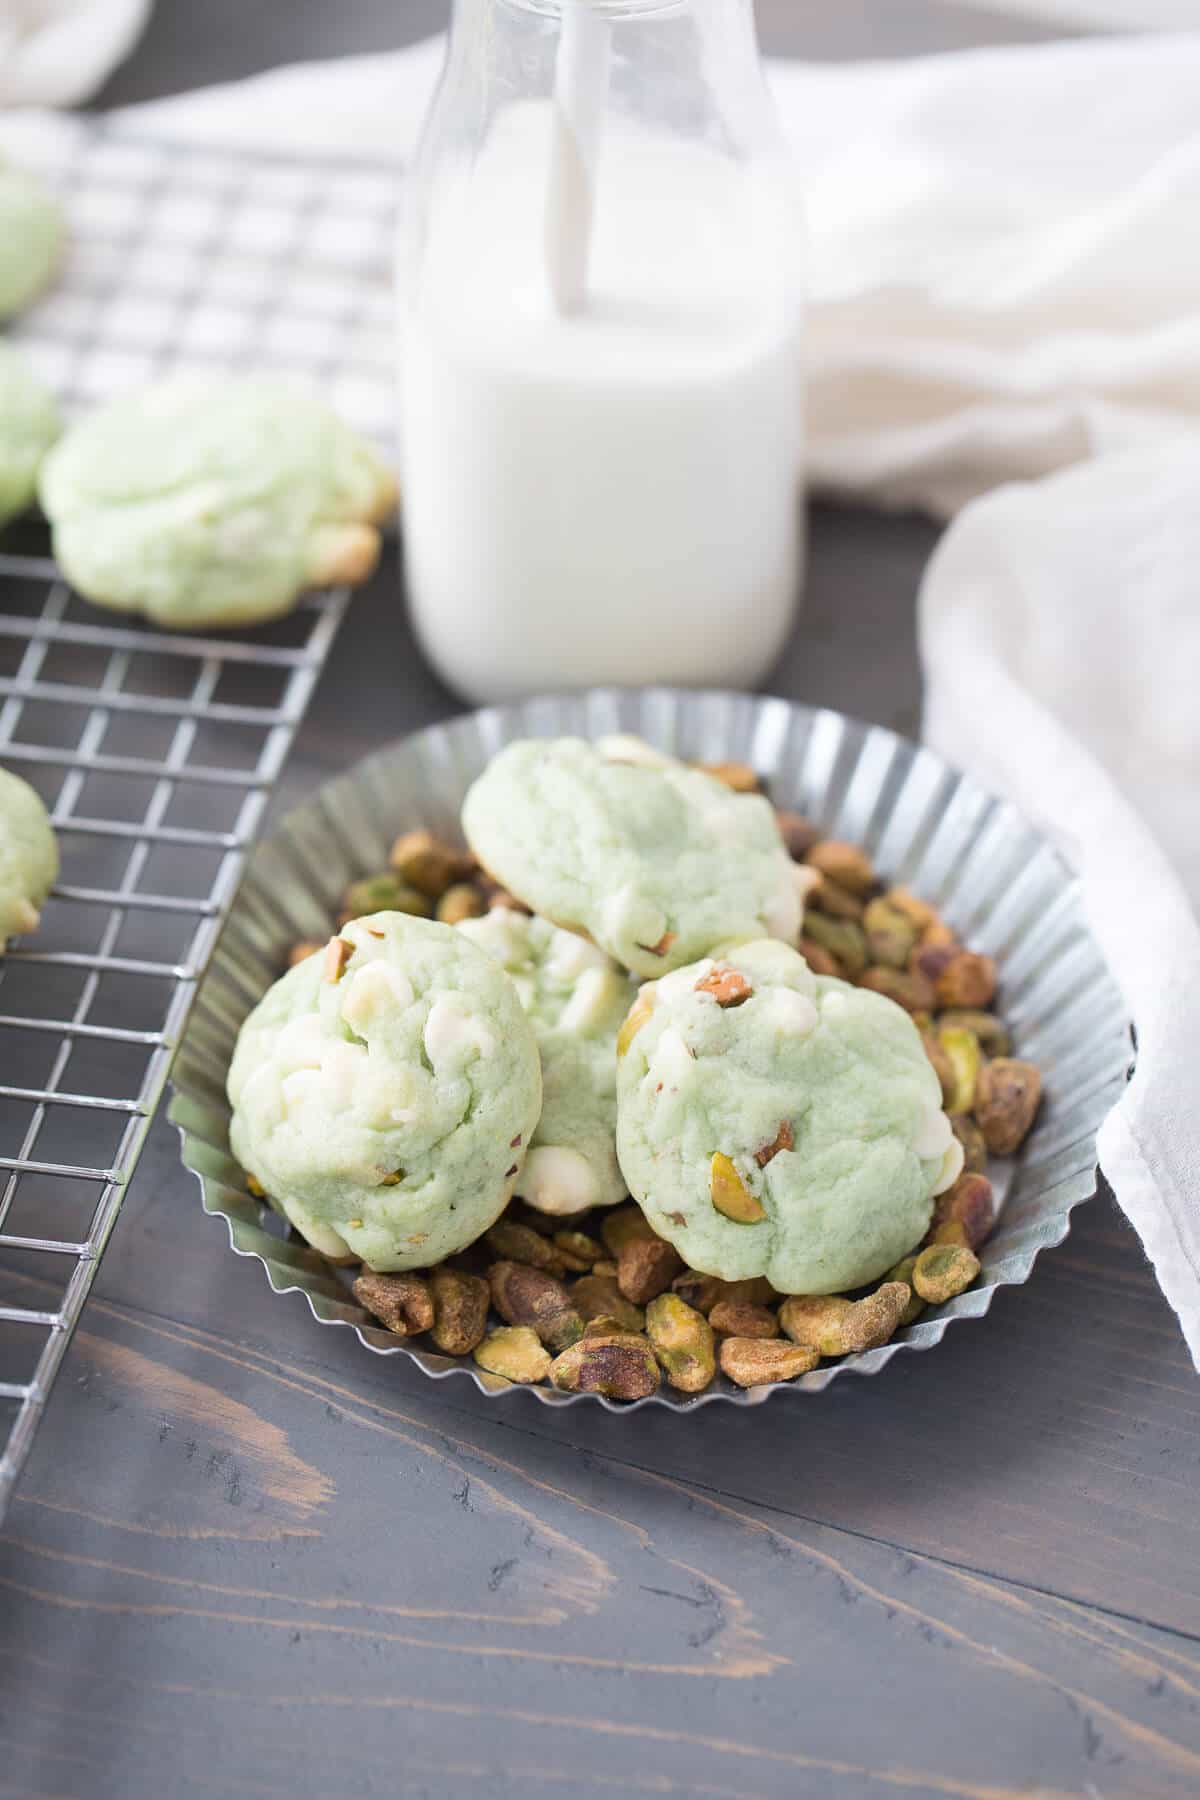 Pudding cookies with a festive pistachio green hue and taste!